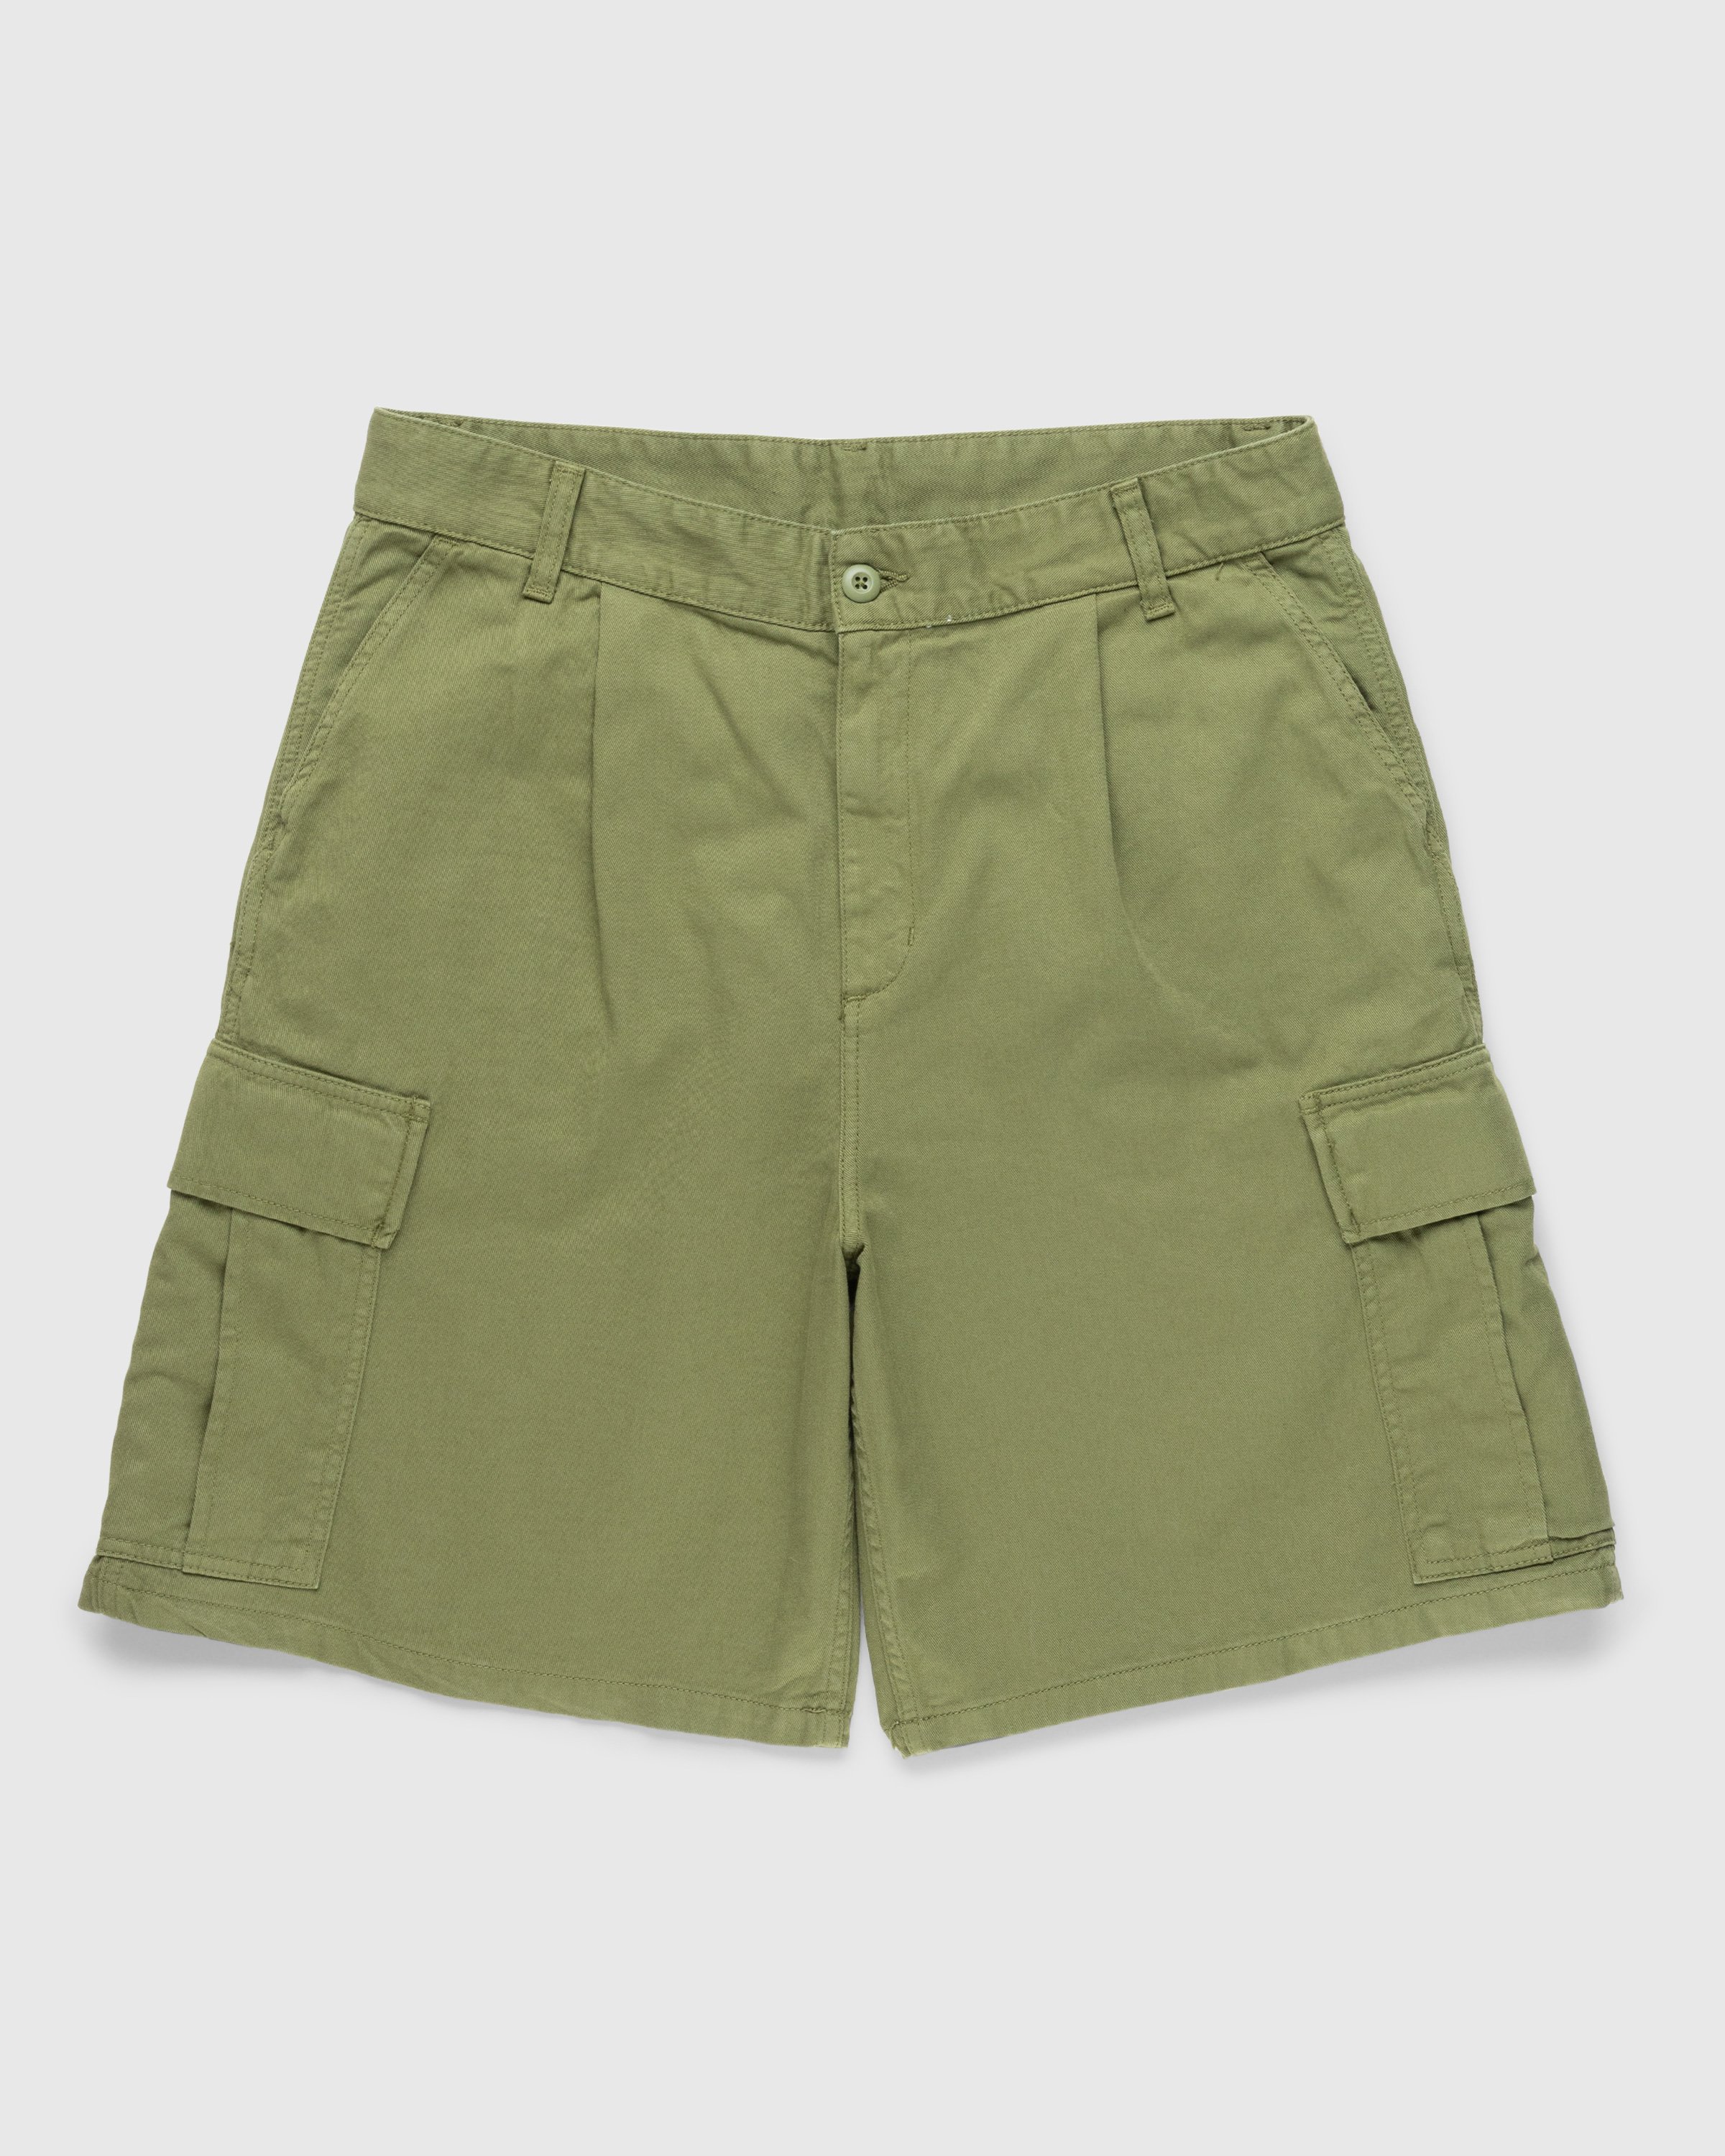 Carhartt WIP - Cole Cargo Short Green - Clothing - Green - Image 1